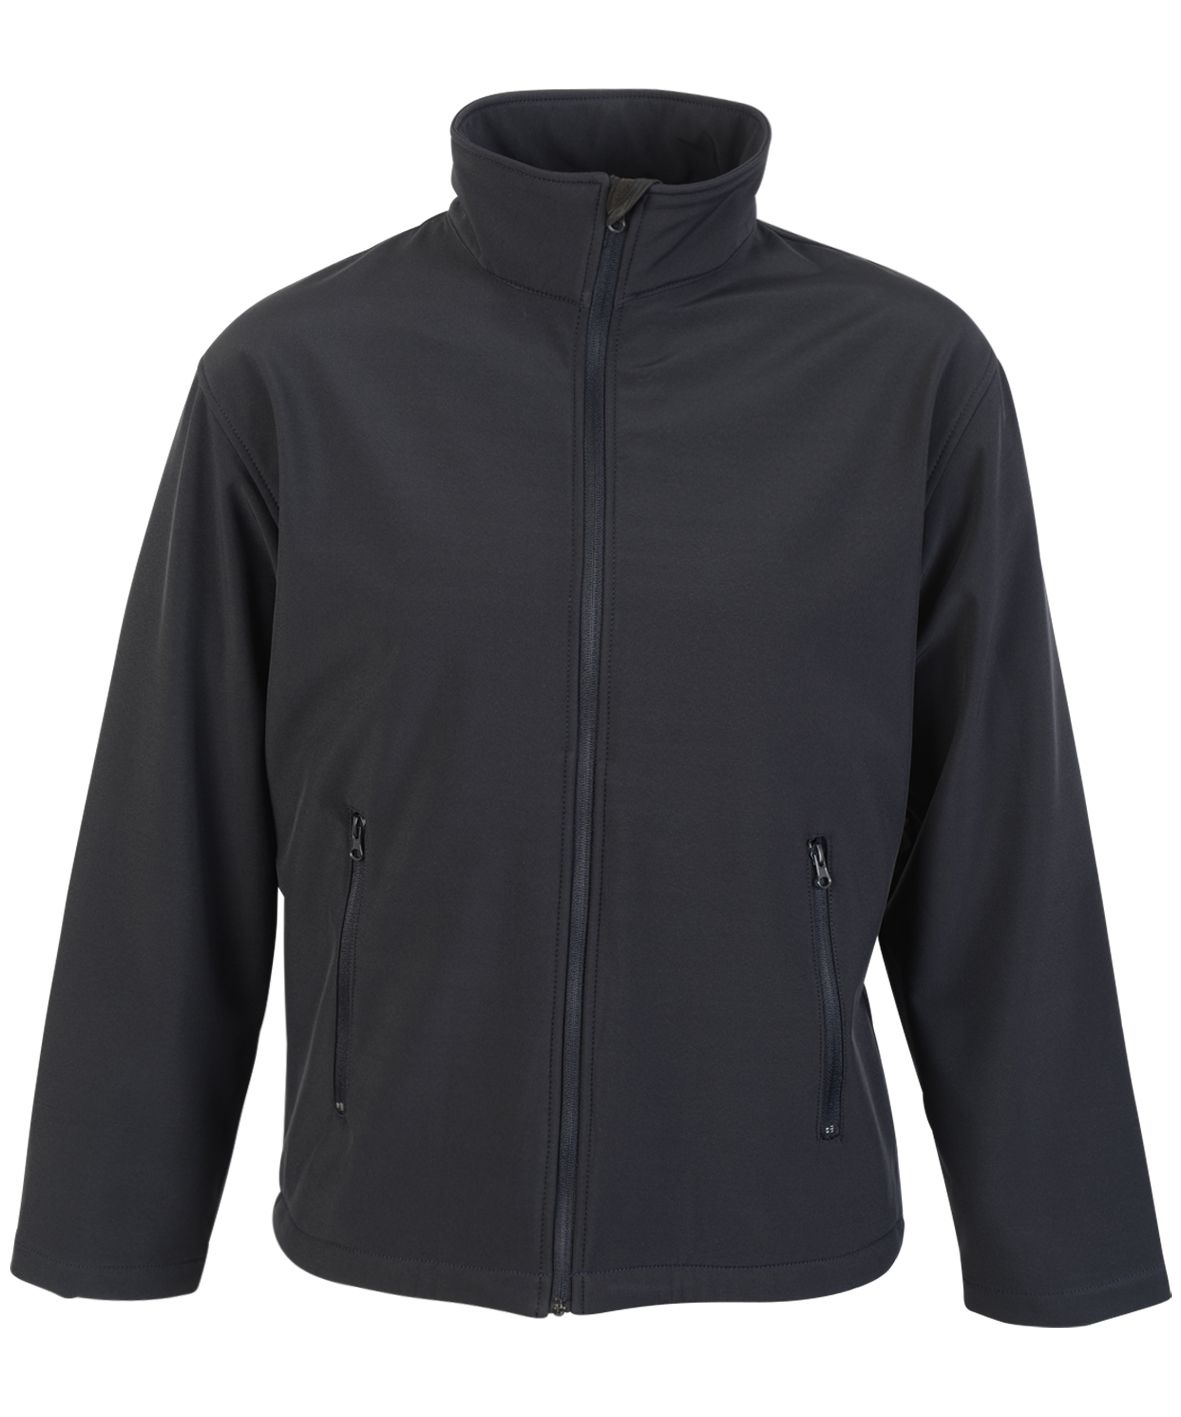 Absolute Apparel Classic Softshell